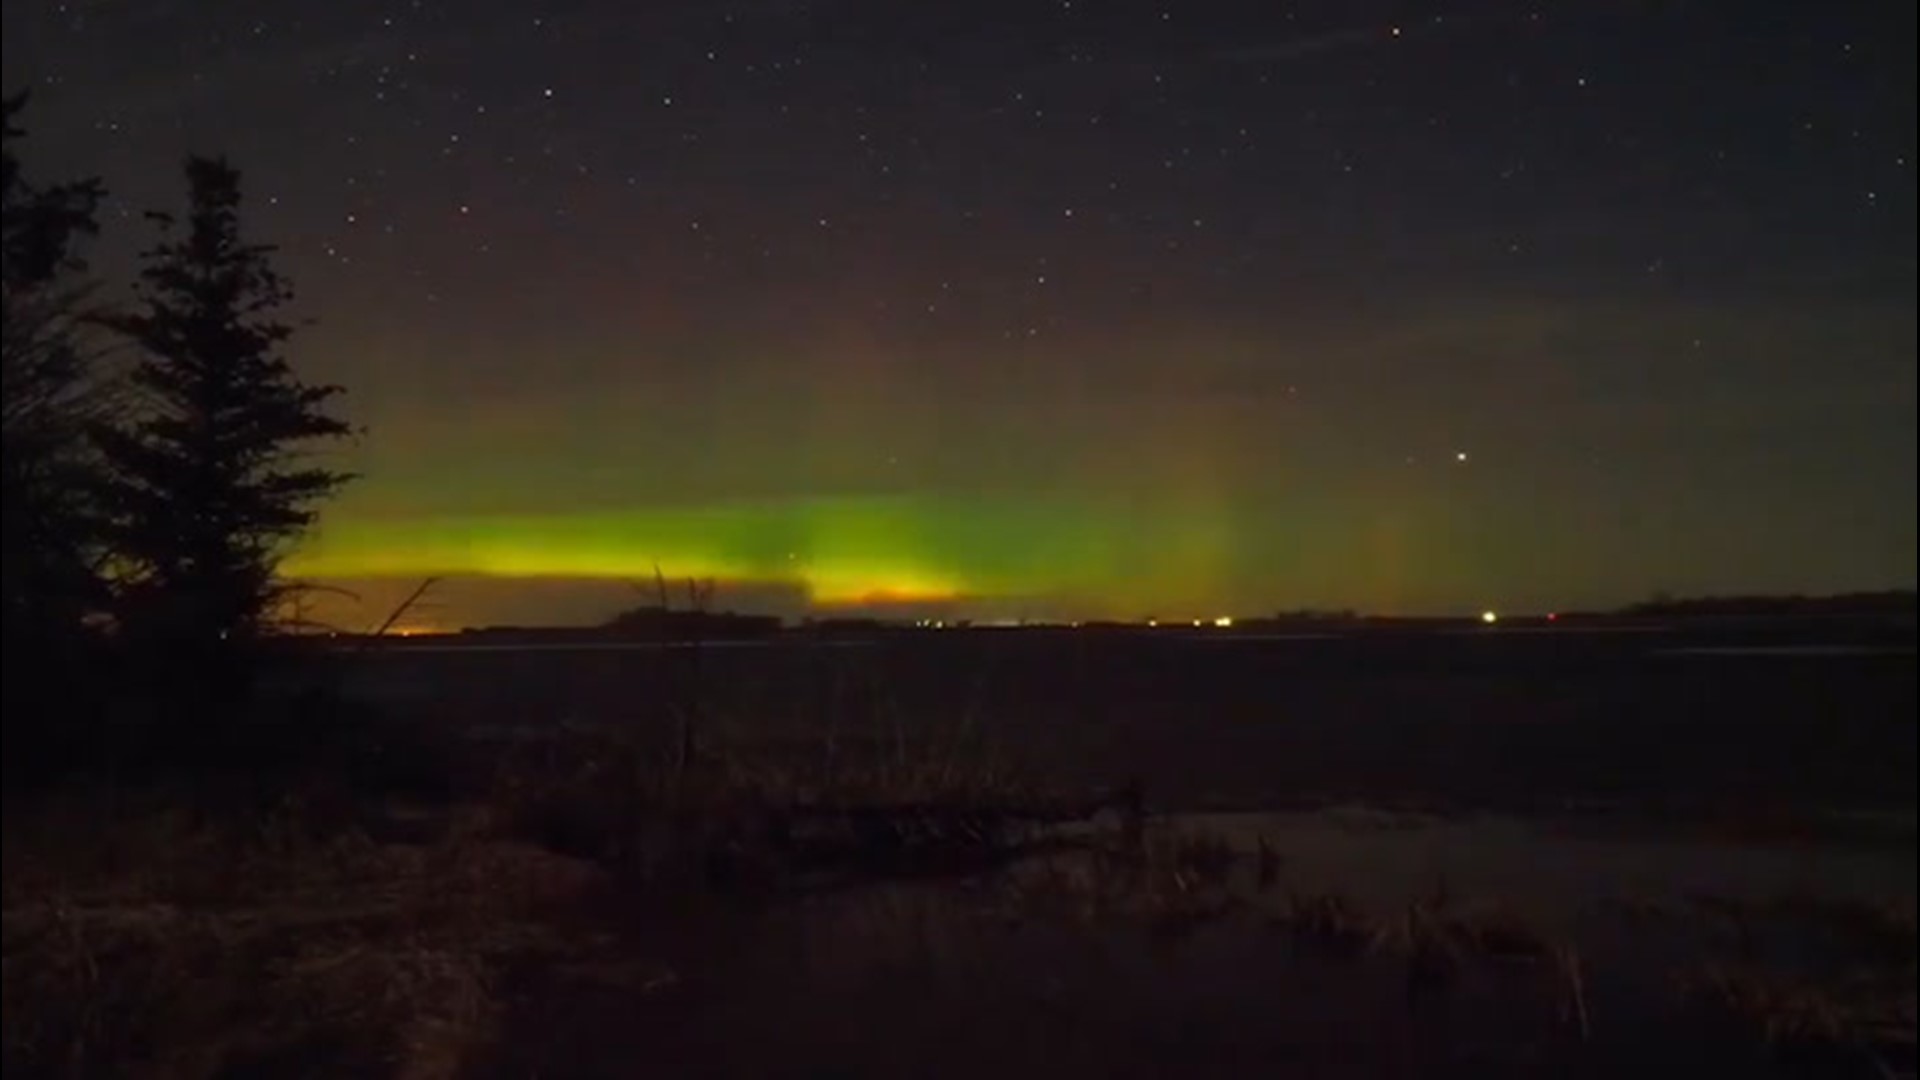 The northern lights lit up the night sky in Graceville, Minnesota, on March 31.